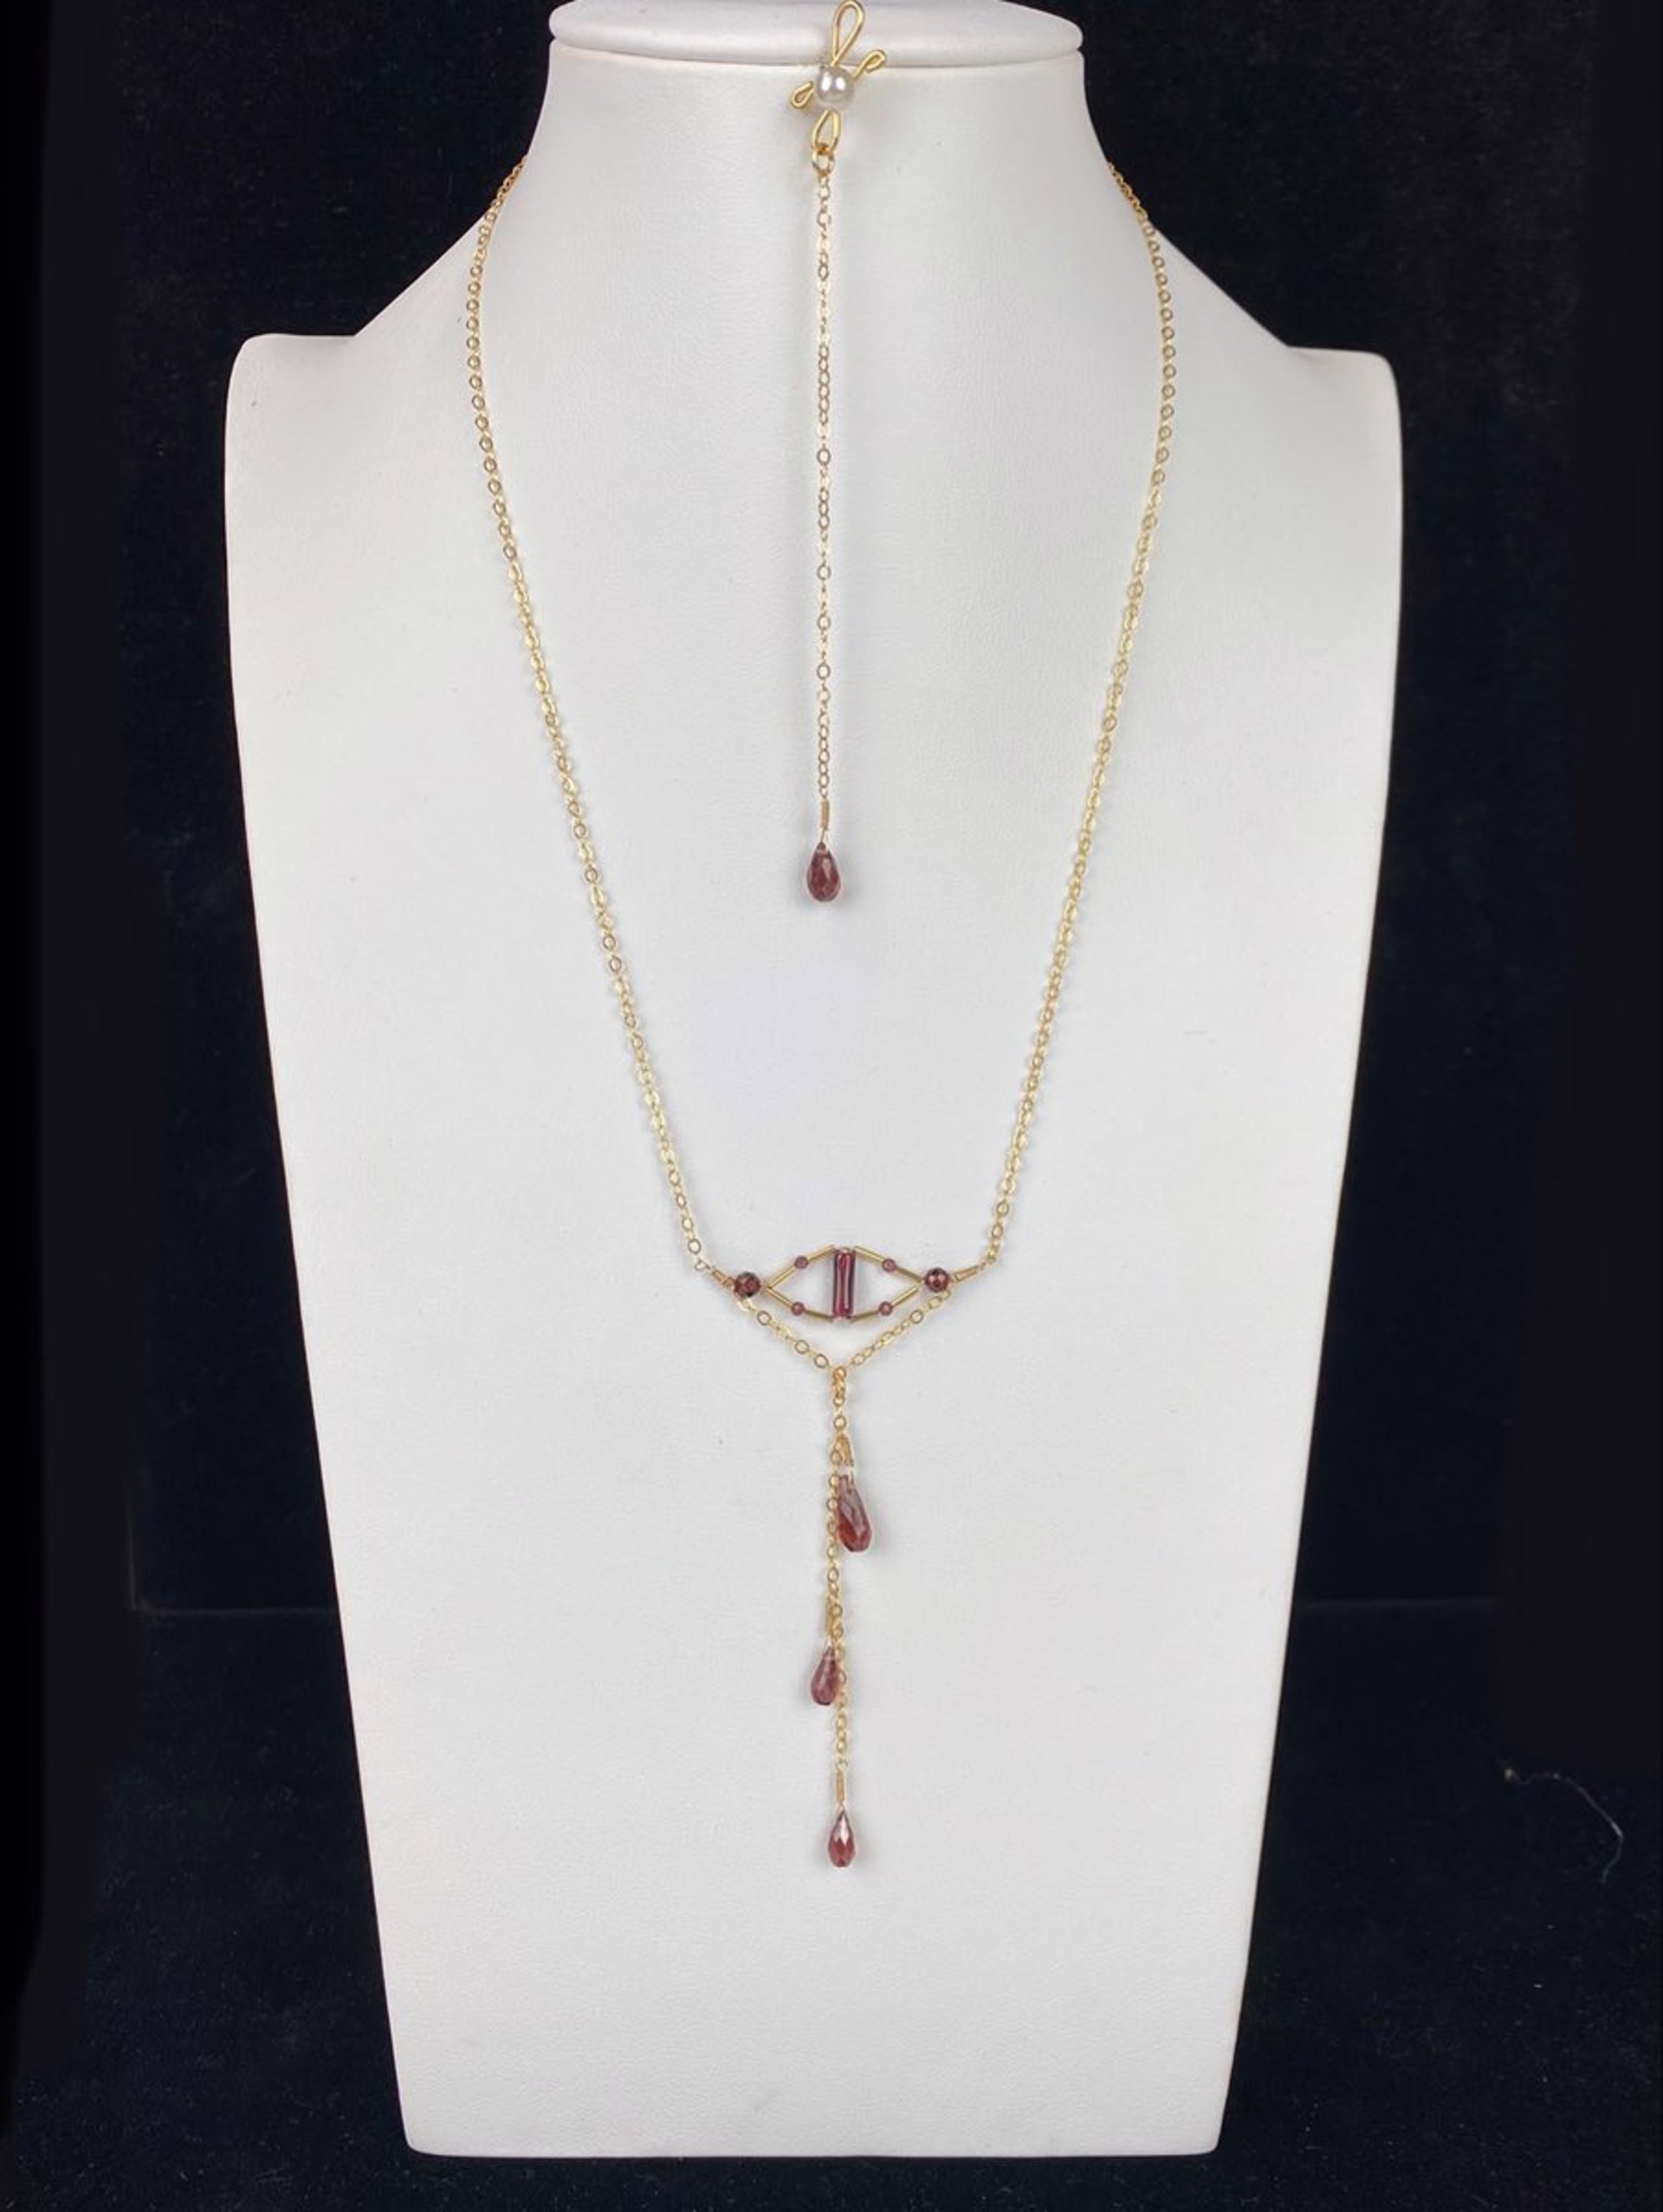 Garnet and 14K GF Insight Waterfall Necklace and Infinity Pendant by Lisa Kelley